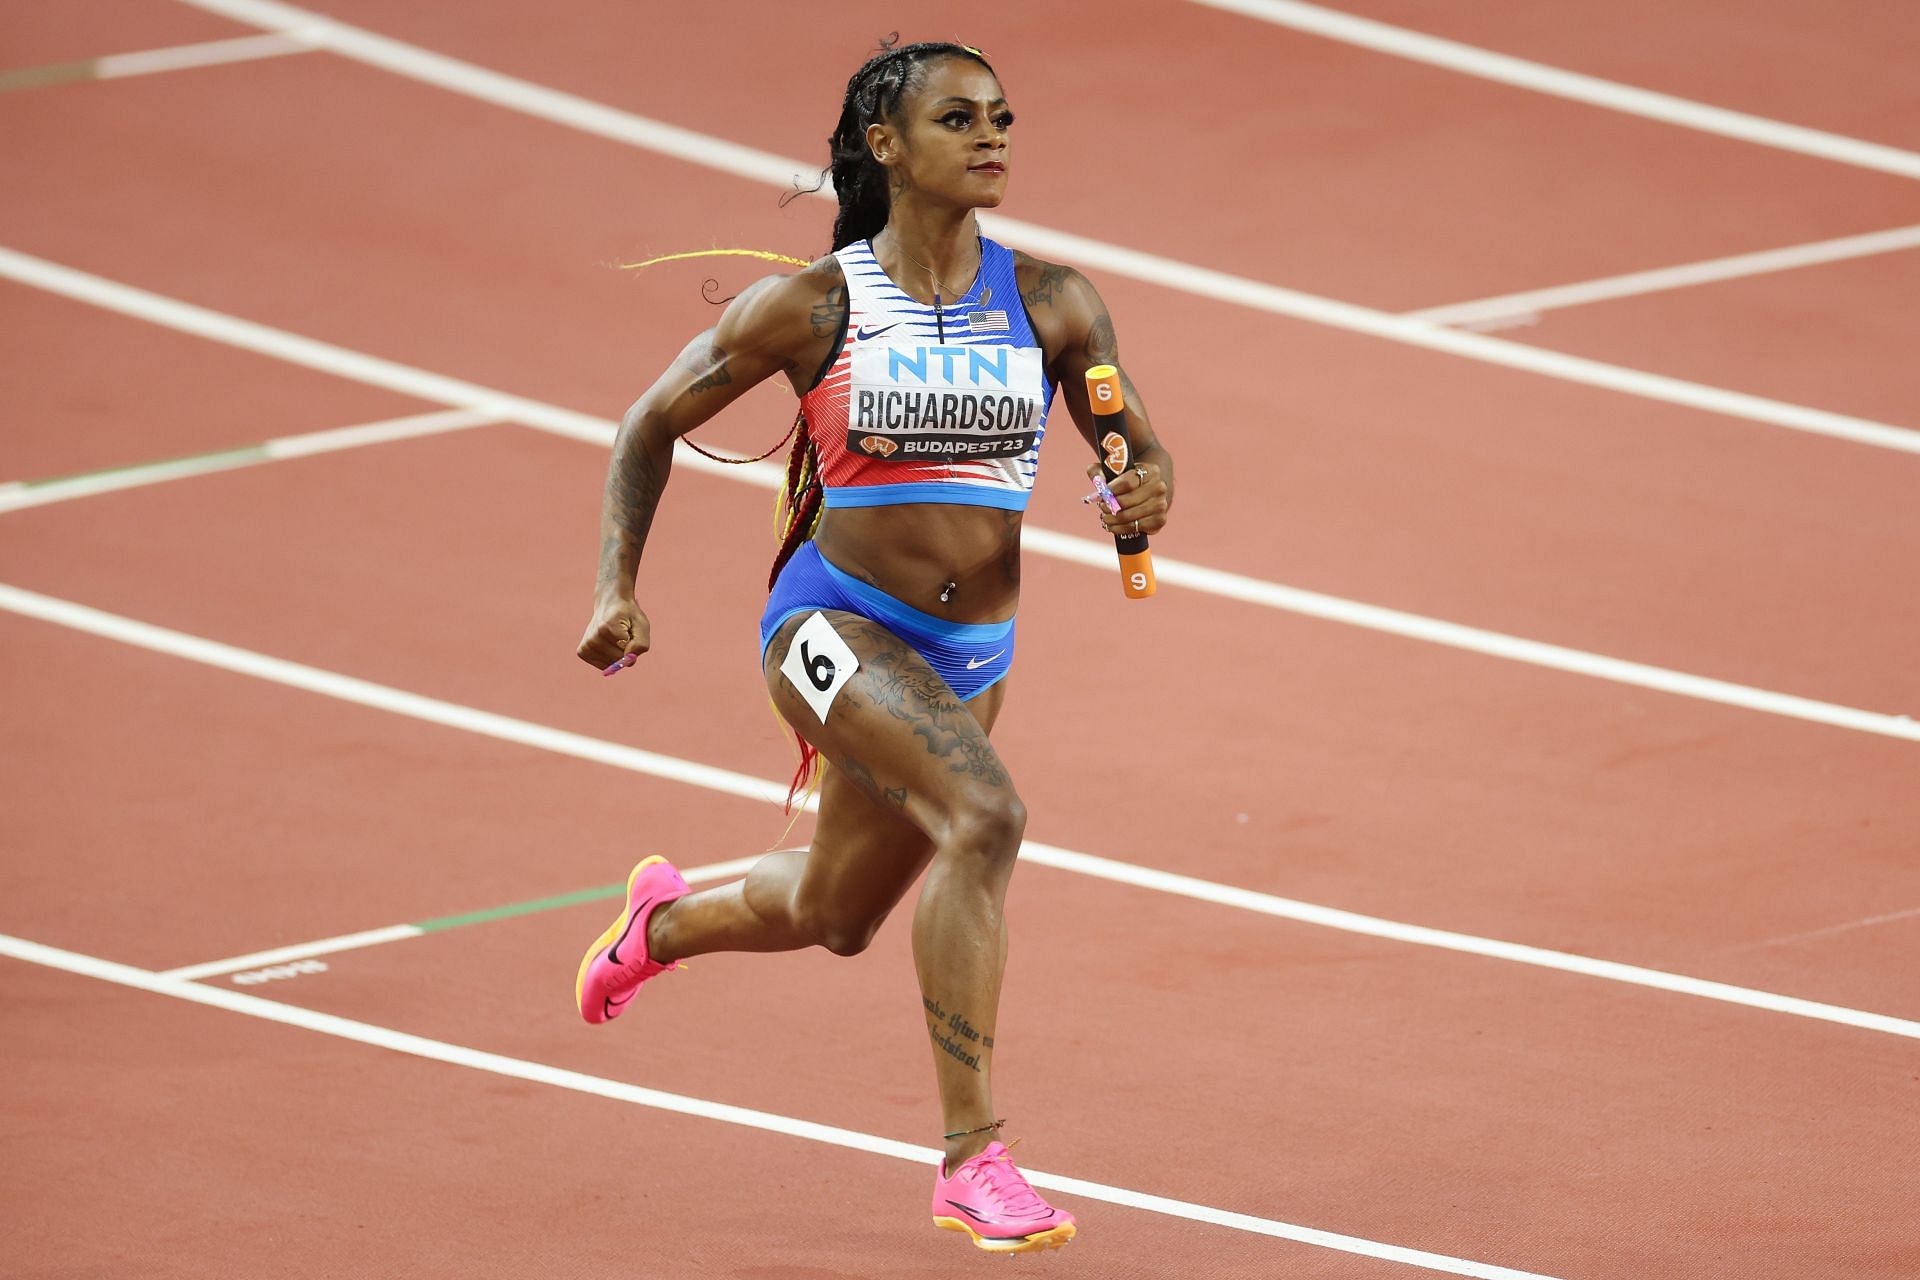 Sprinter Sha'Carri Richardson Is Now the Fastest Woman in America